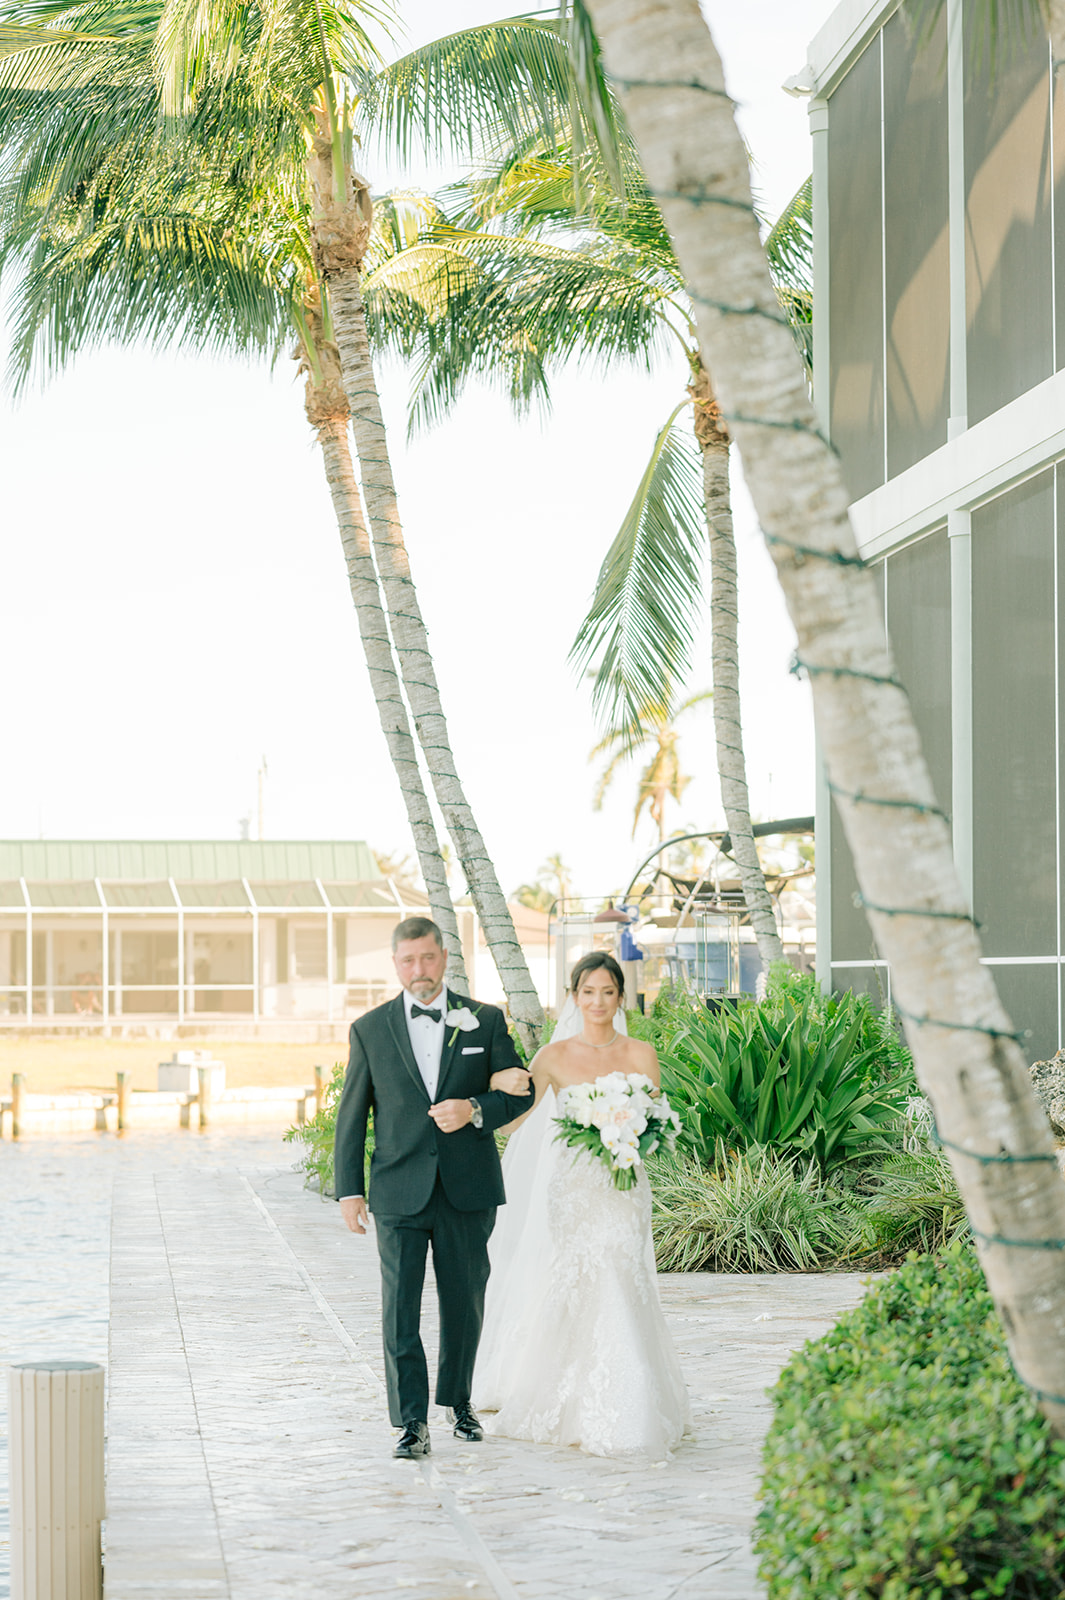 Beautiful Fine Art Wedding Photography in Naples Florida - Every Moment Captured
